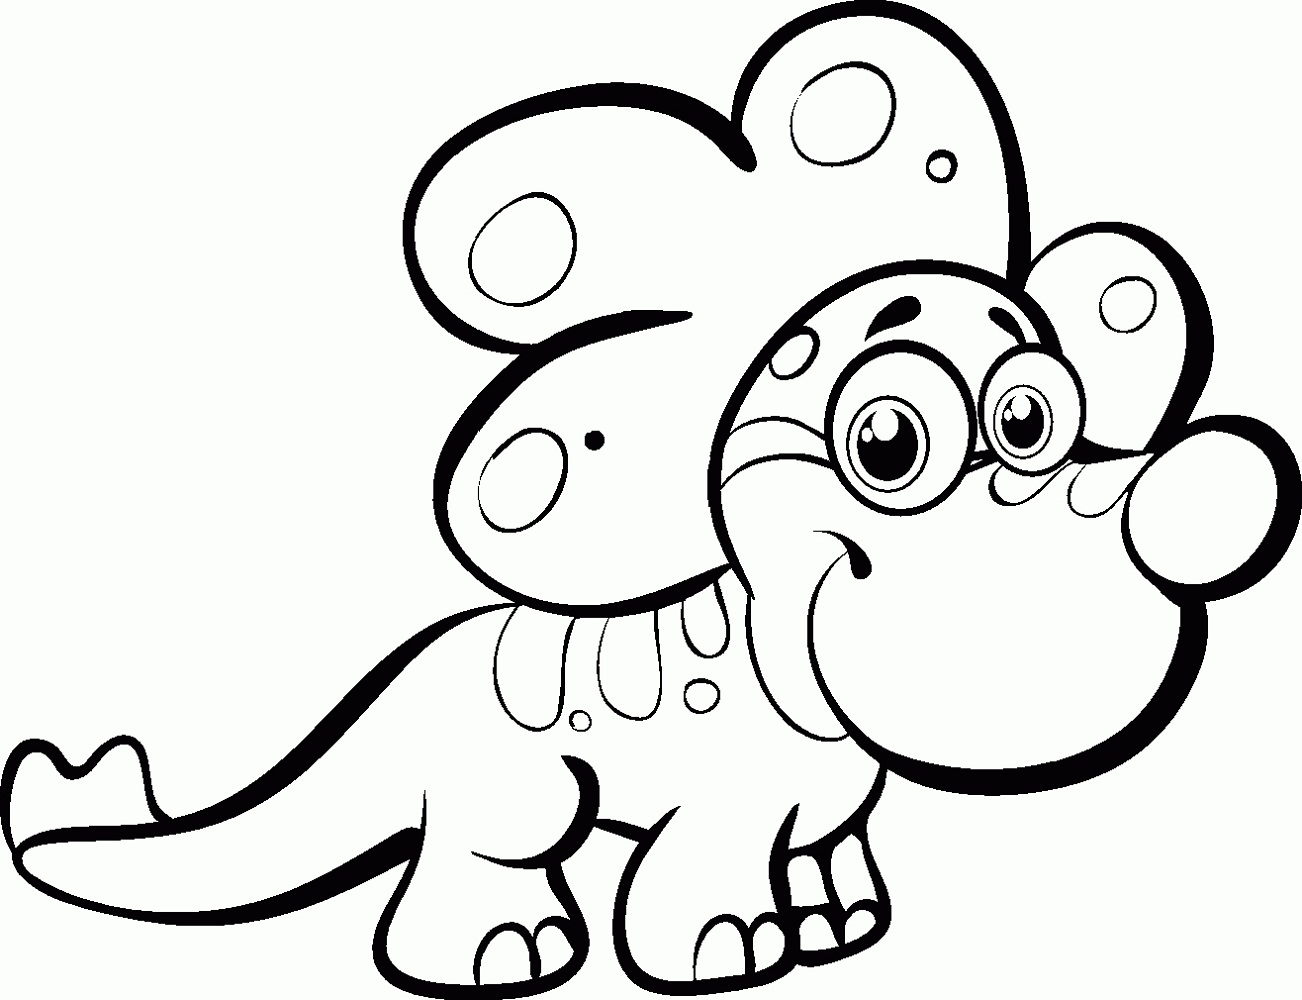 Baby Dinosaur Coloring Pages for Preschoolers | Activity Shelter